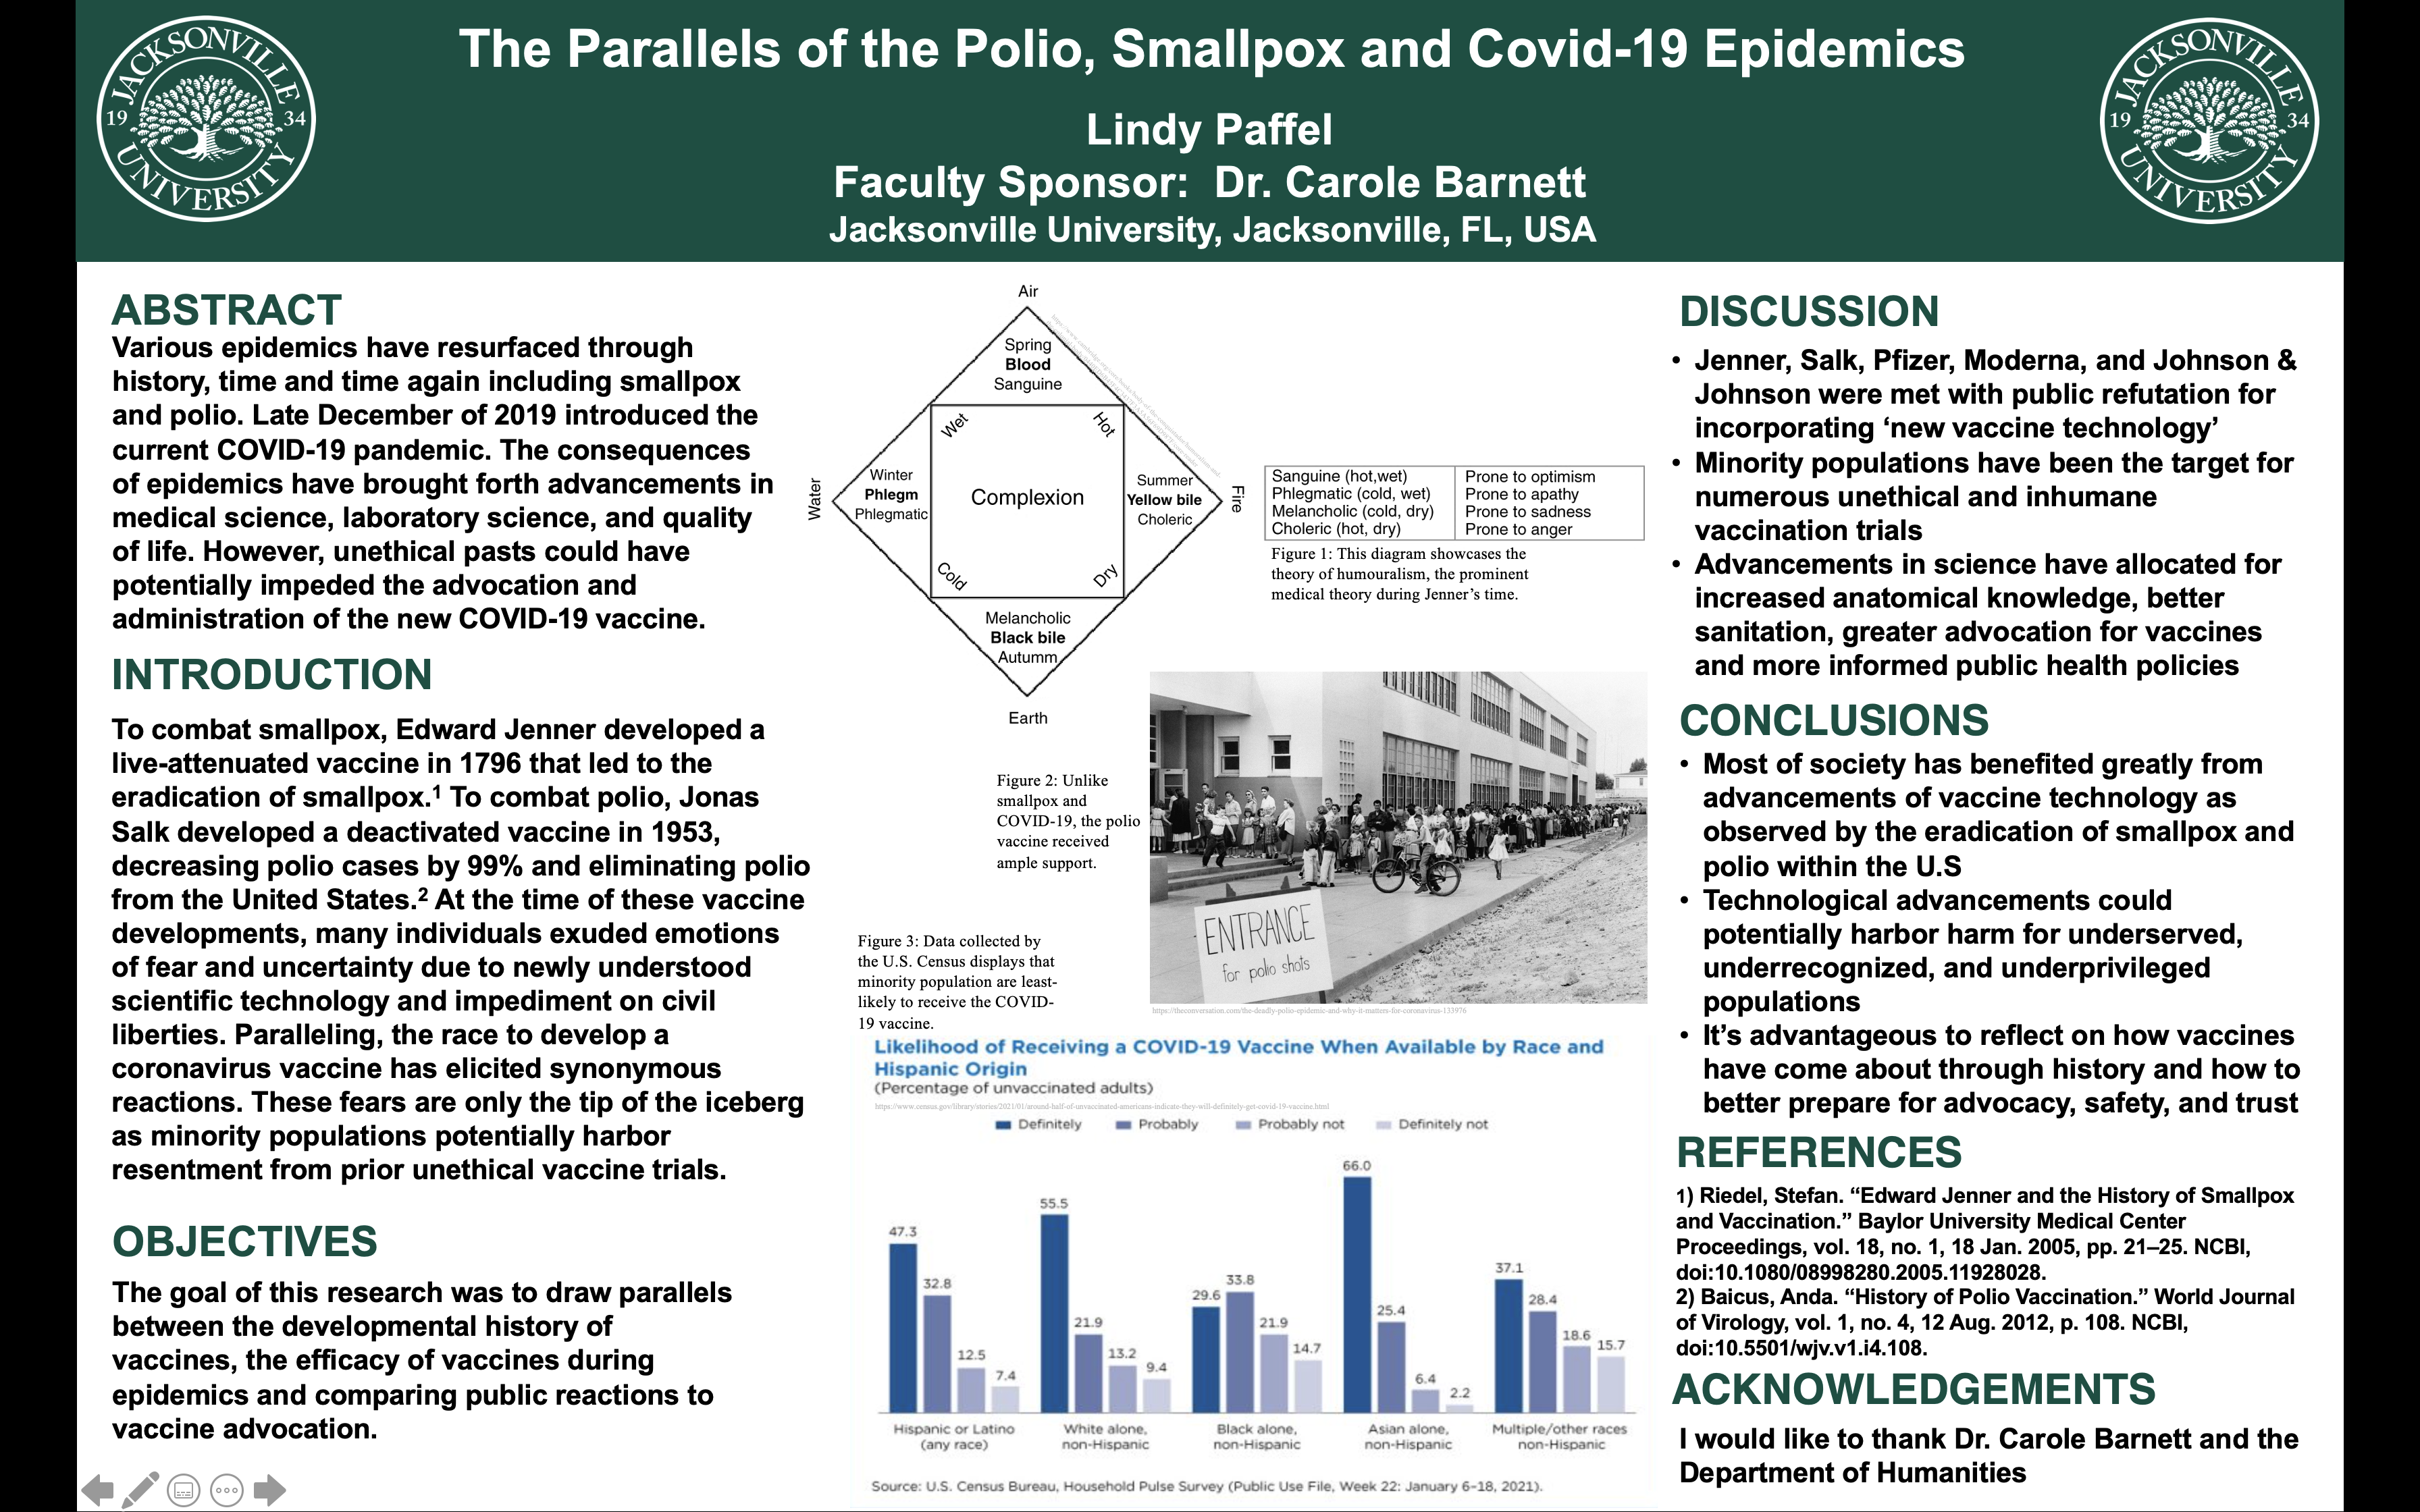 Showcase Image for The Parallels of the Polio, Smallpox and Covid-19 Epidemics 